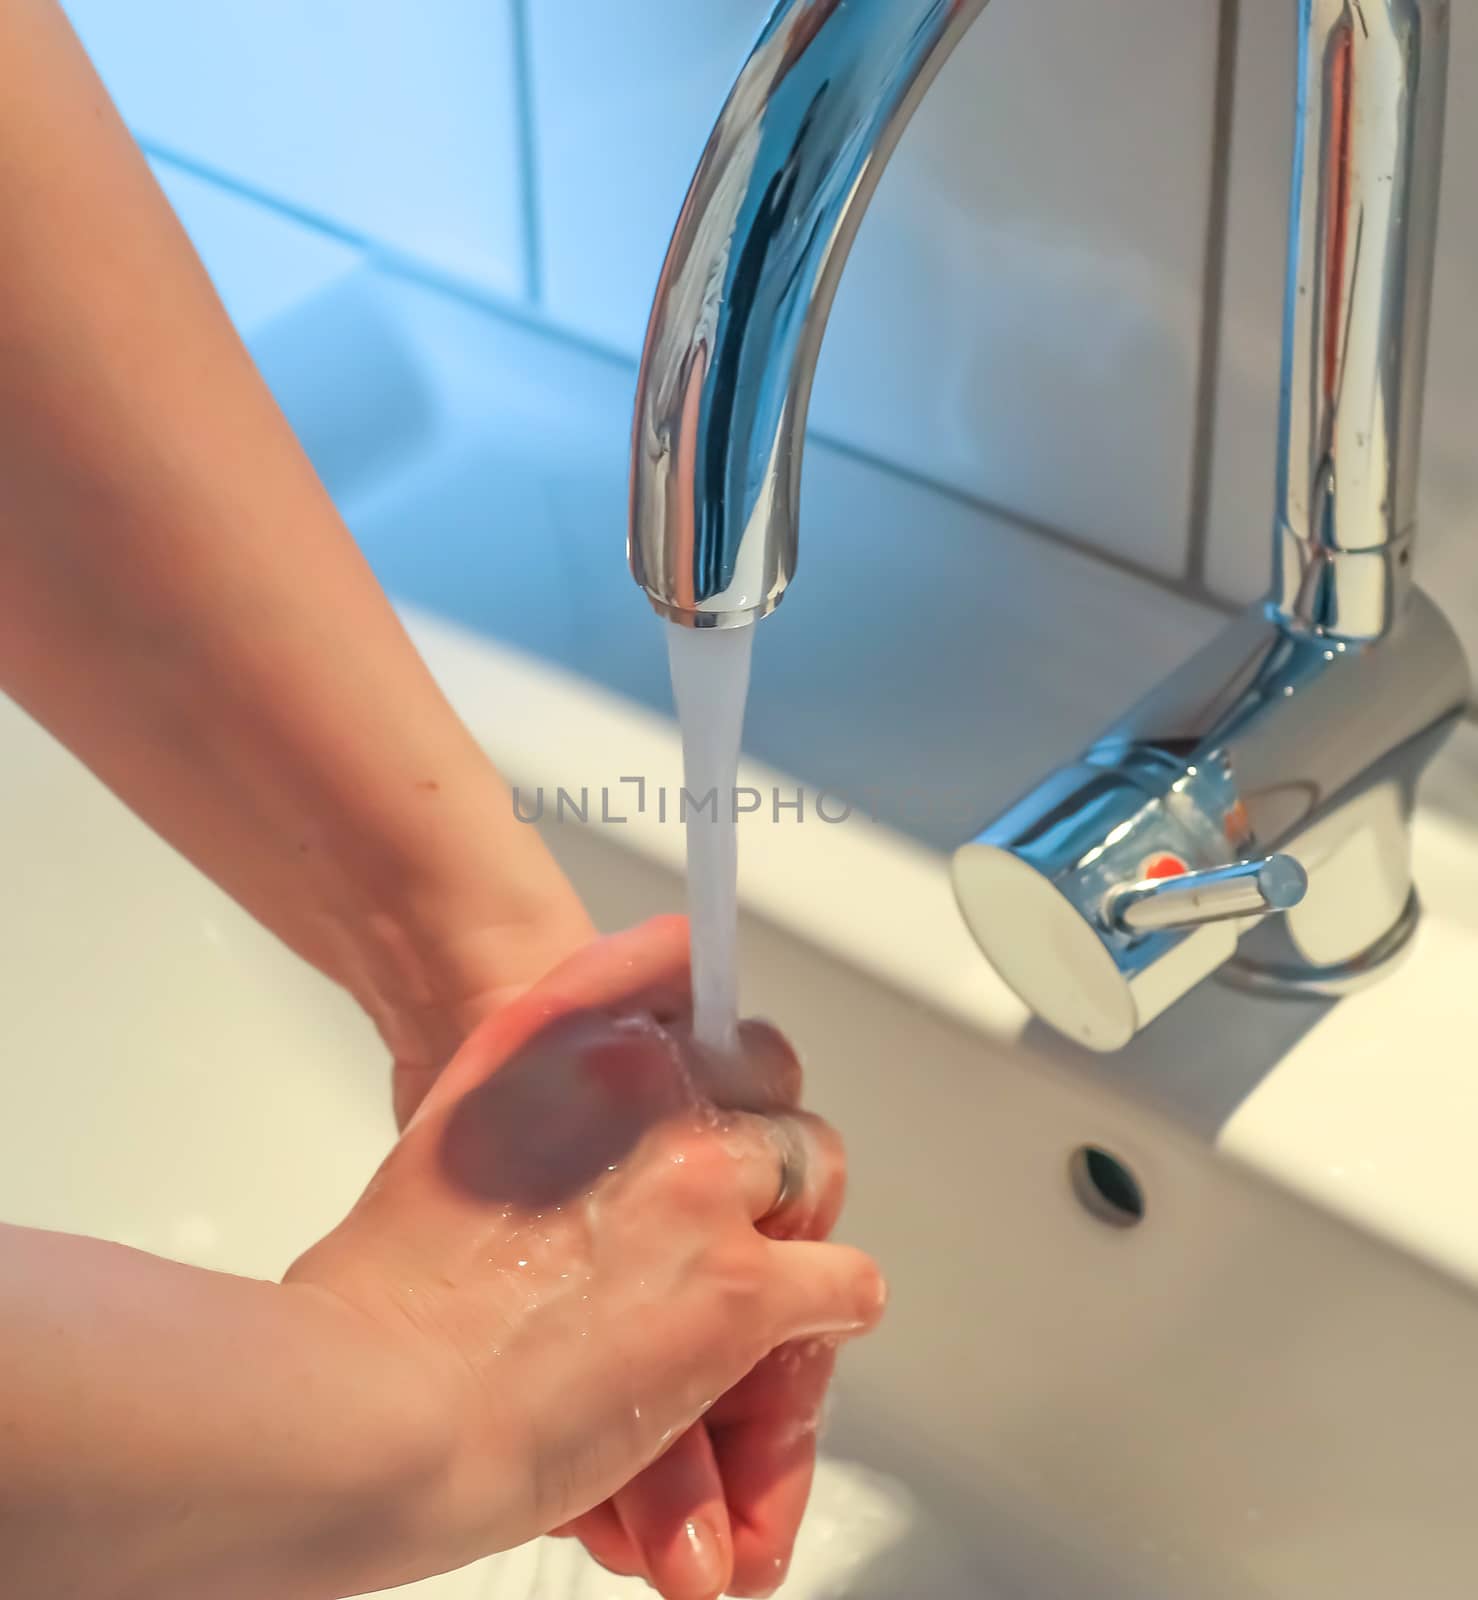 Cleaning and washing hands with soap prevention for outbreak of coronavirus covid-19 by MP_foto71